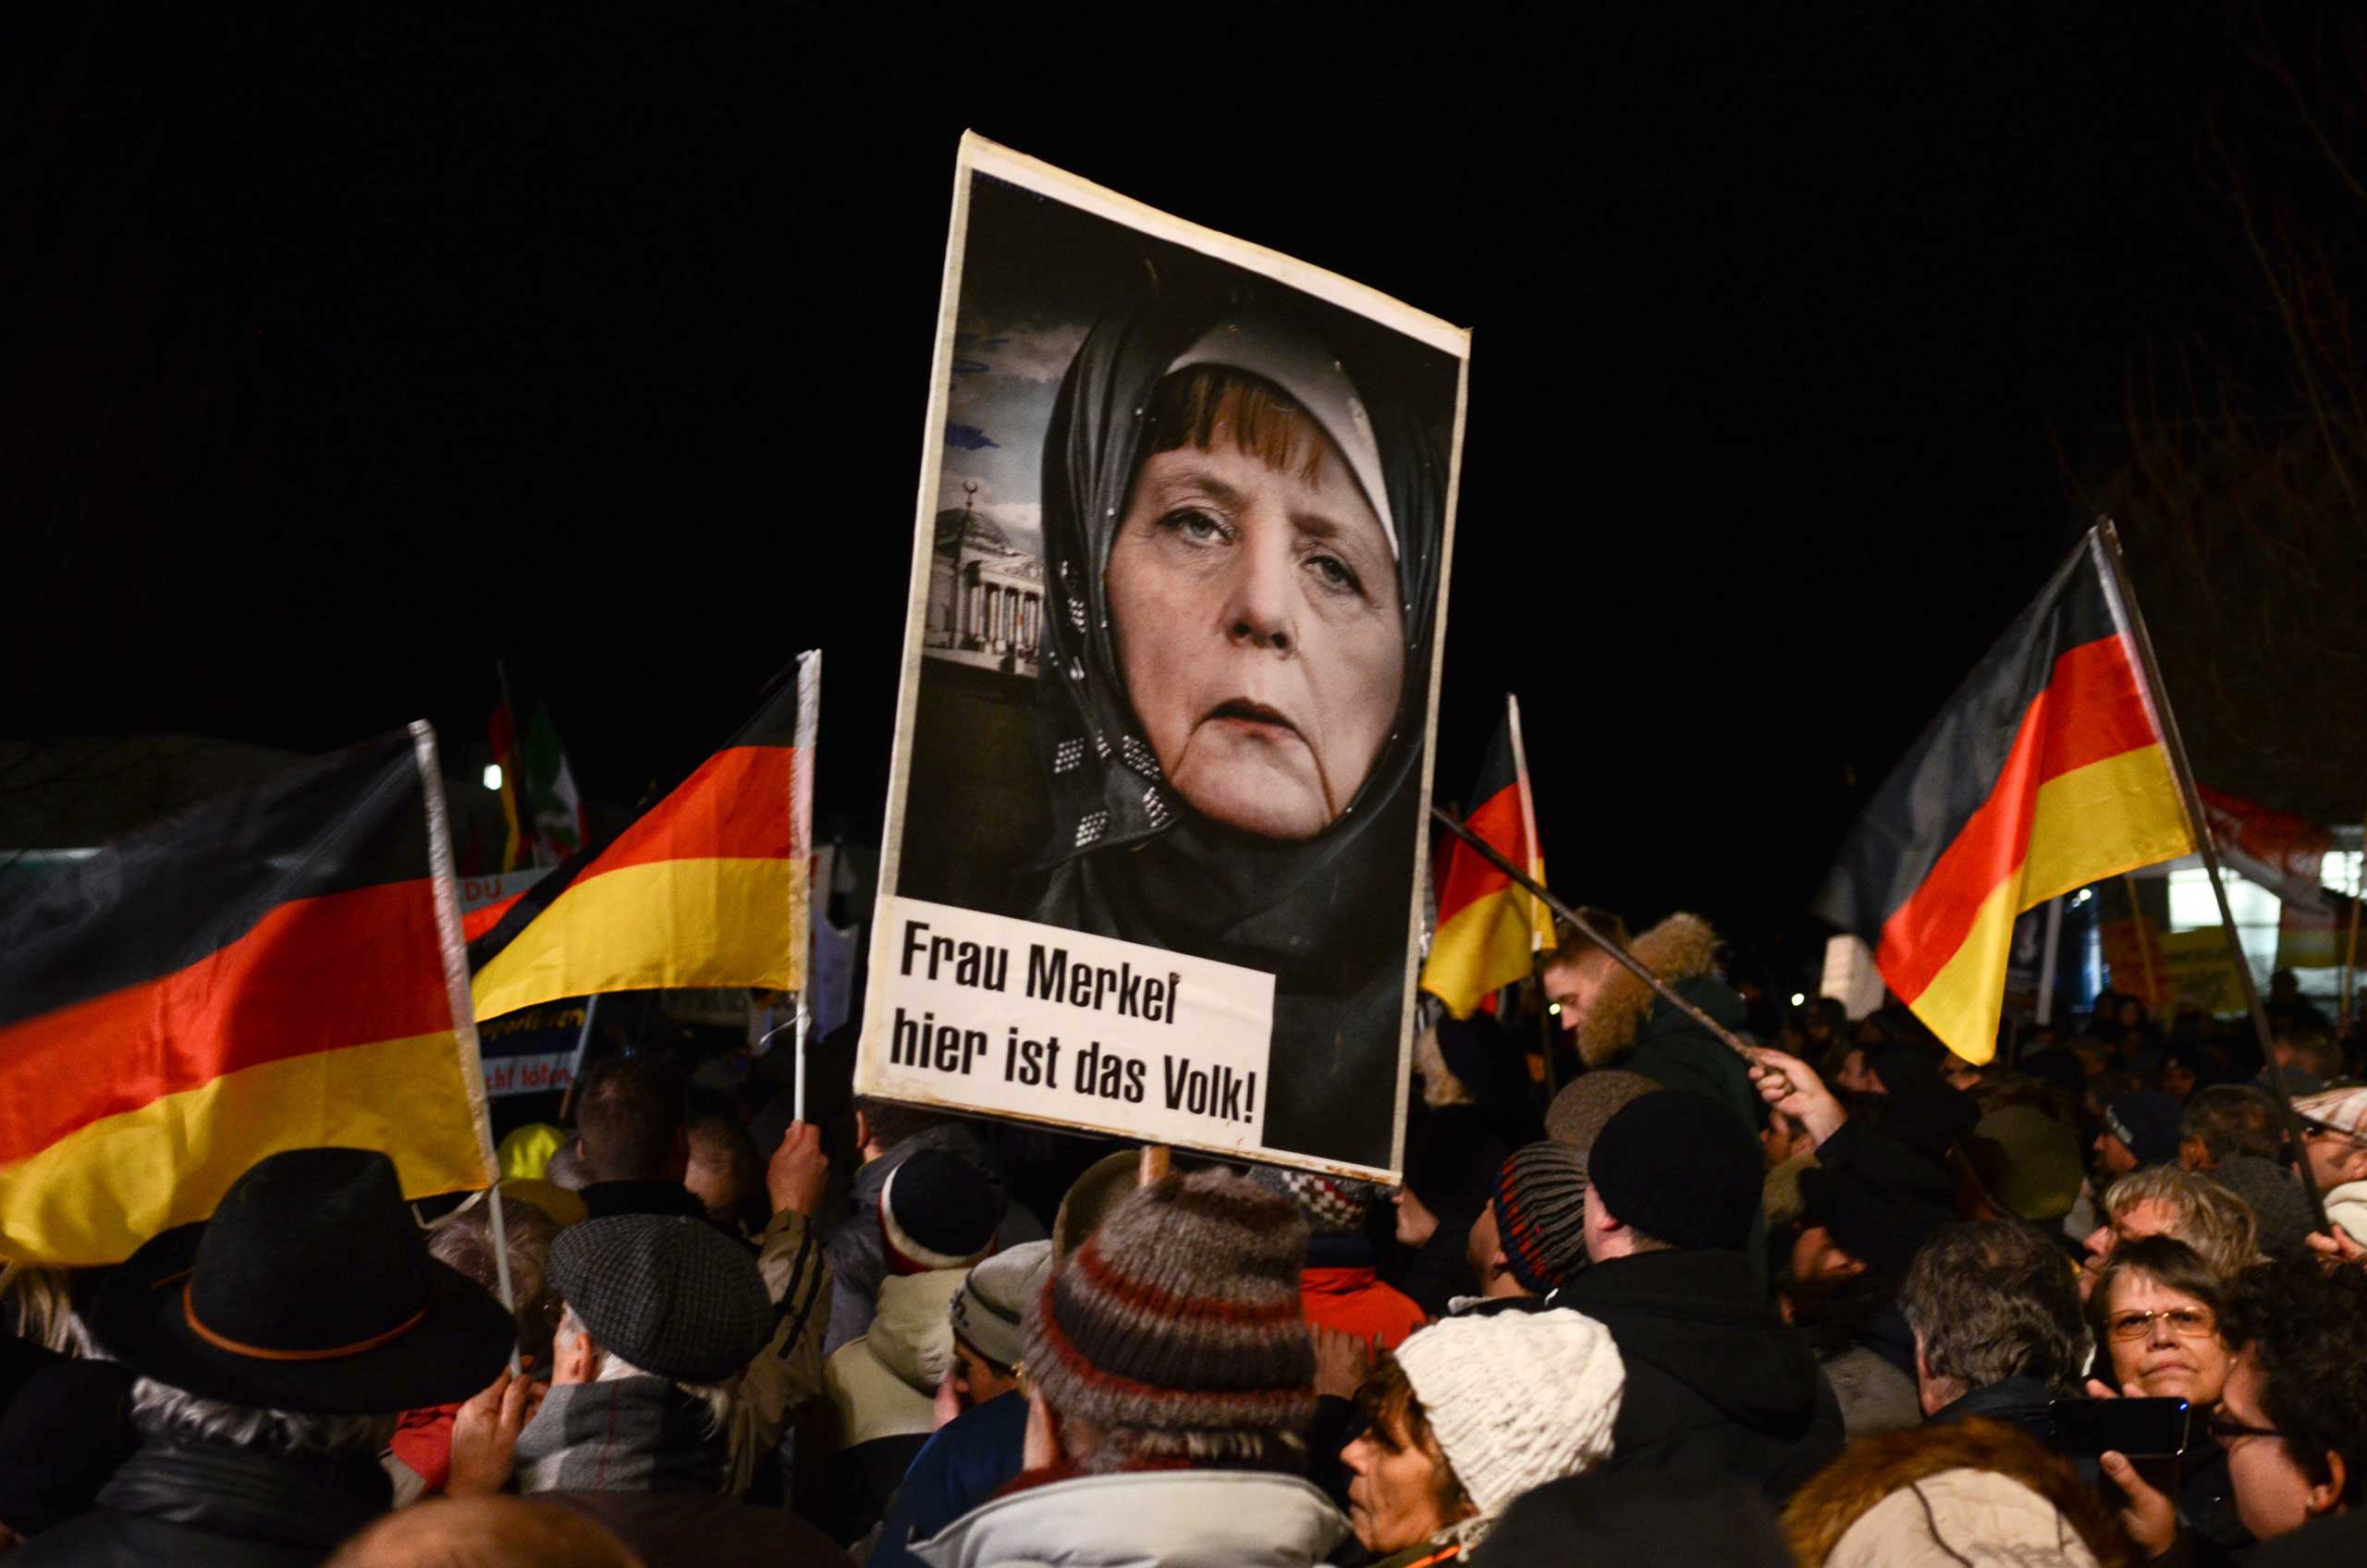 Thousands of PEGIDA (Patriotic Europeans Against the Islamization of the West) supporters march in Dresden, Germany on Jan. 12, 2014. (Epoca Libera—Demotix/Corbis)